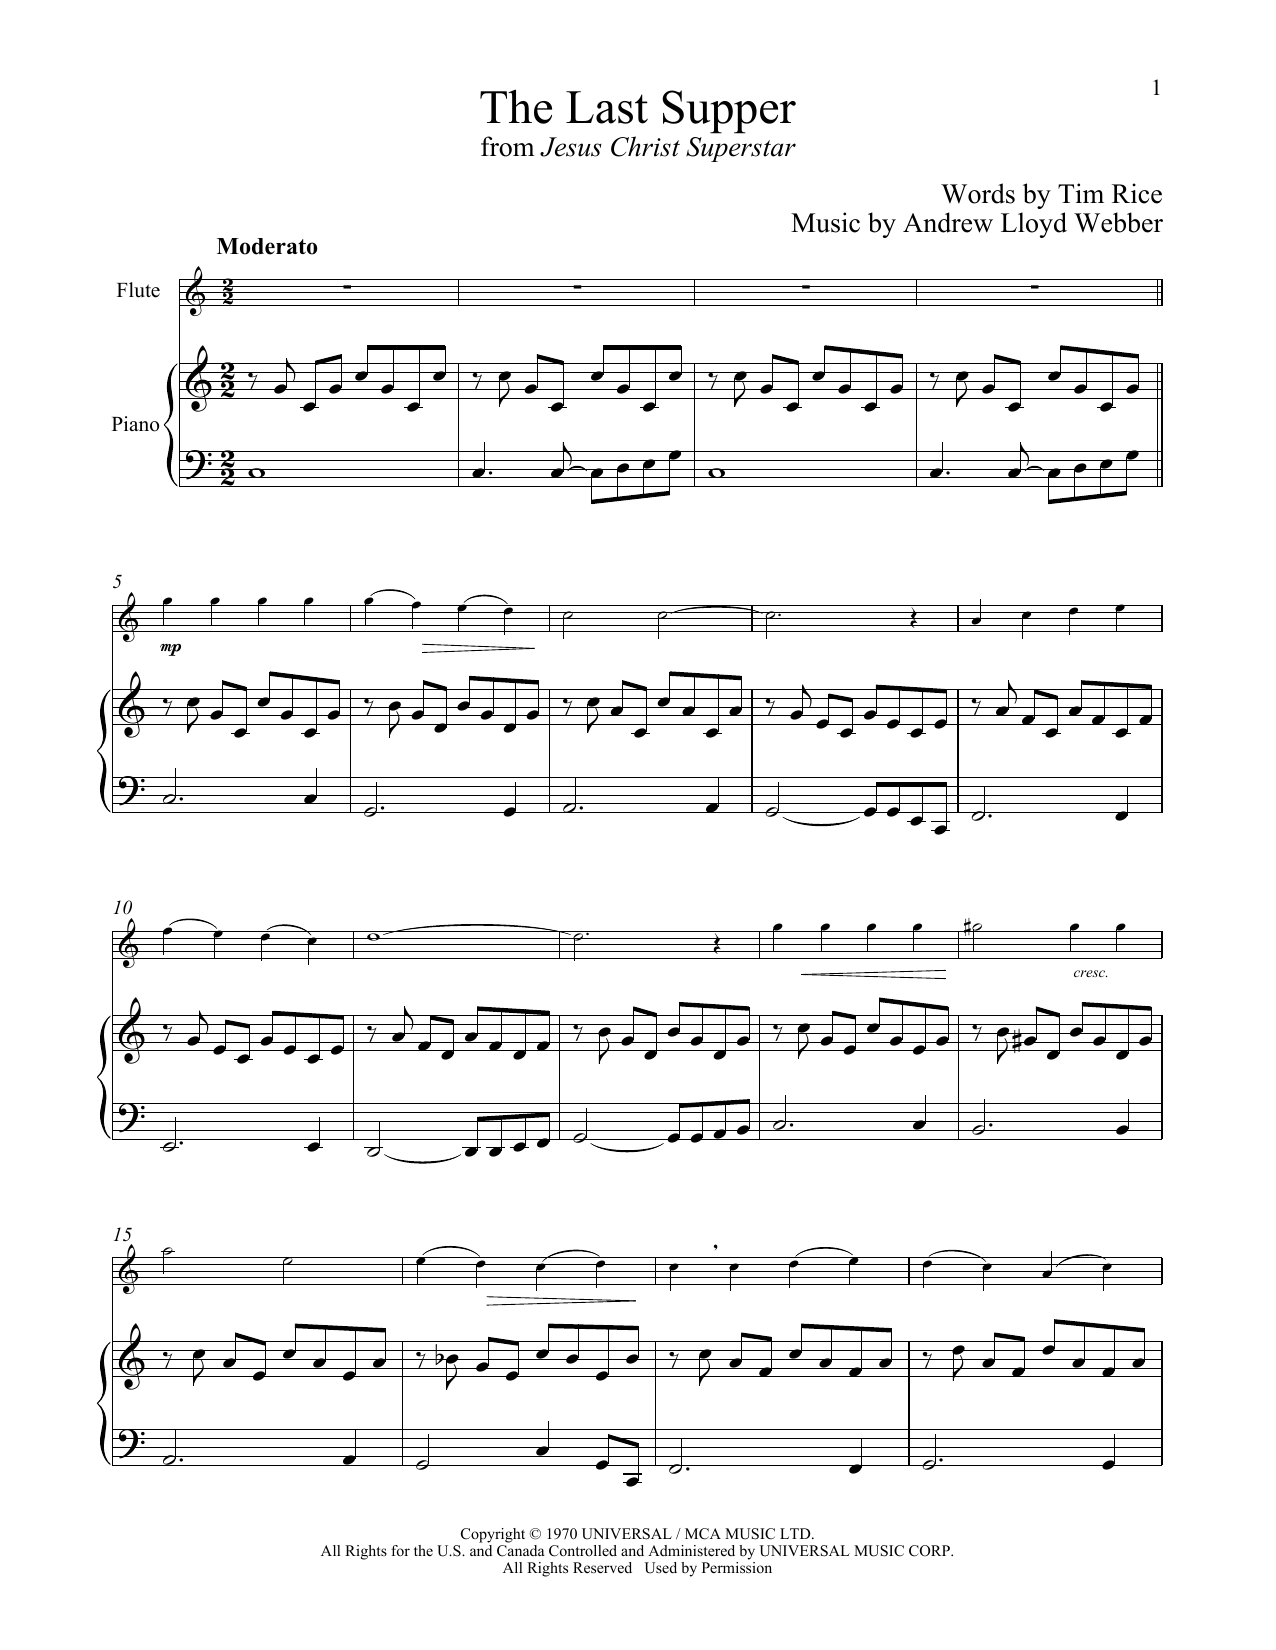 Andrew Lloyd Webber The Last Supper (from Jesus Christ Superstar) sheet music notes and chords. Download Printable PDF.